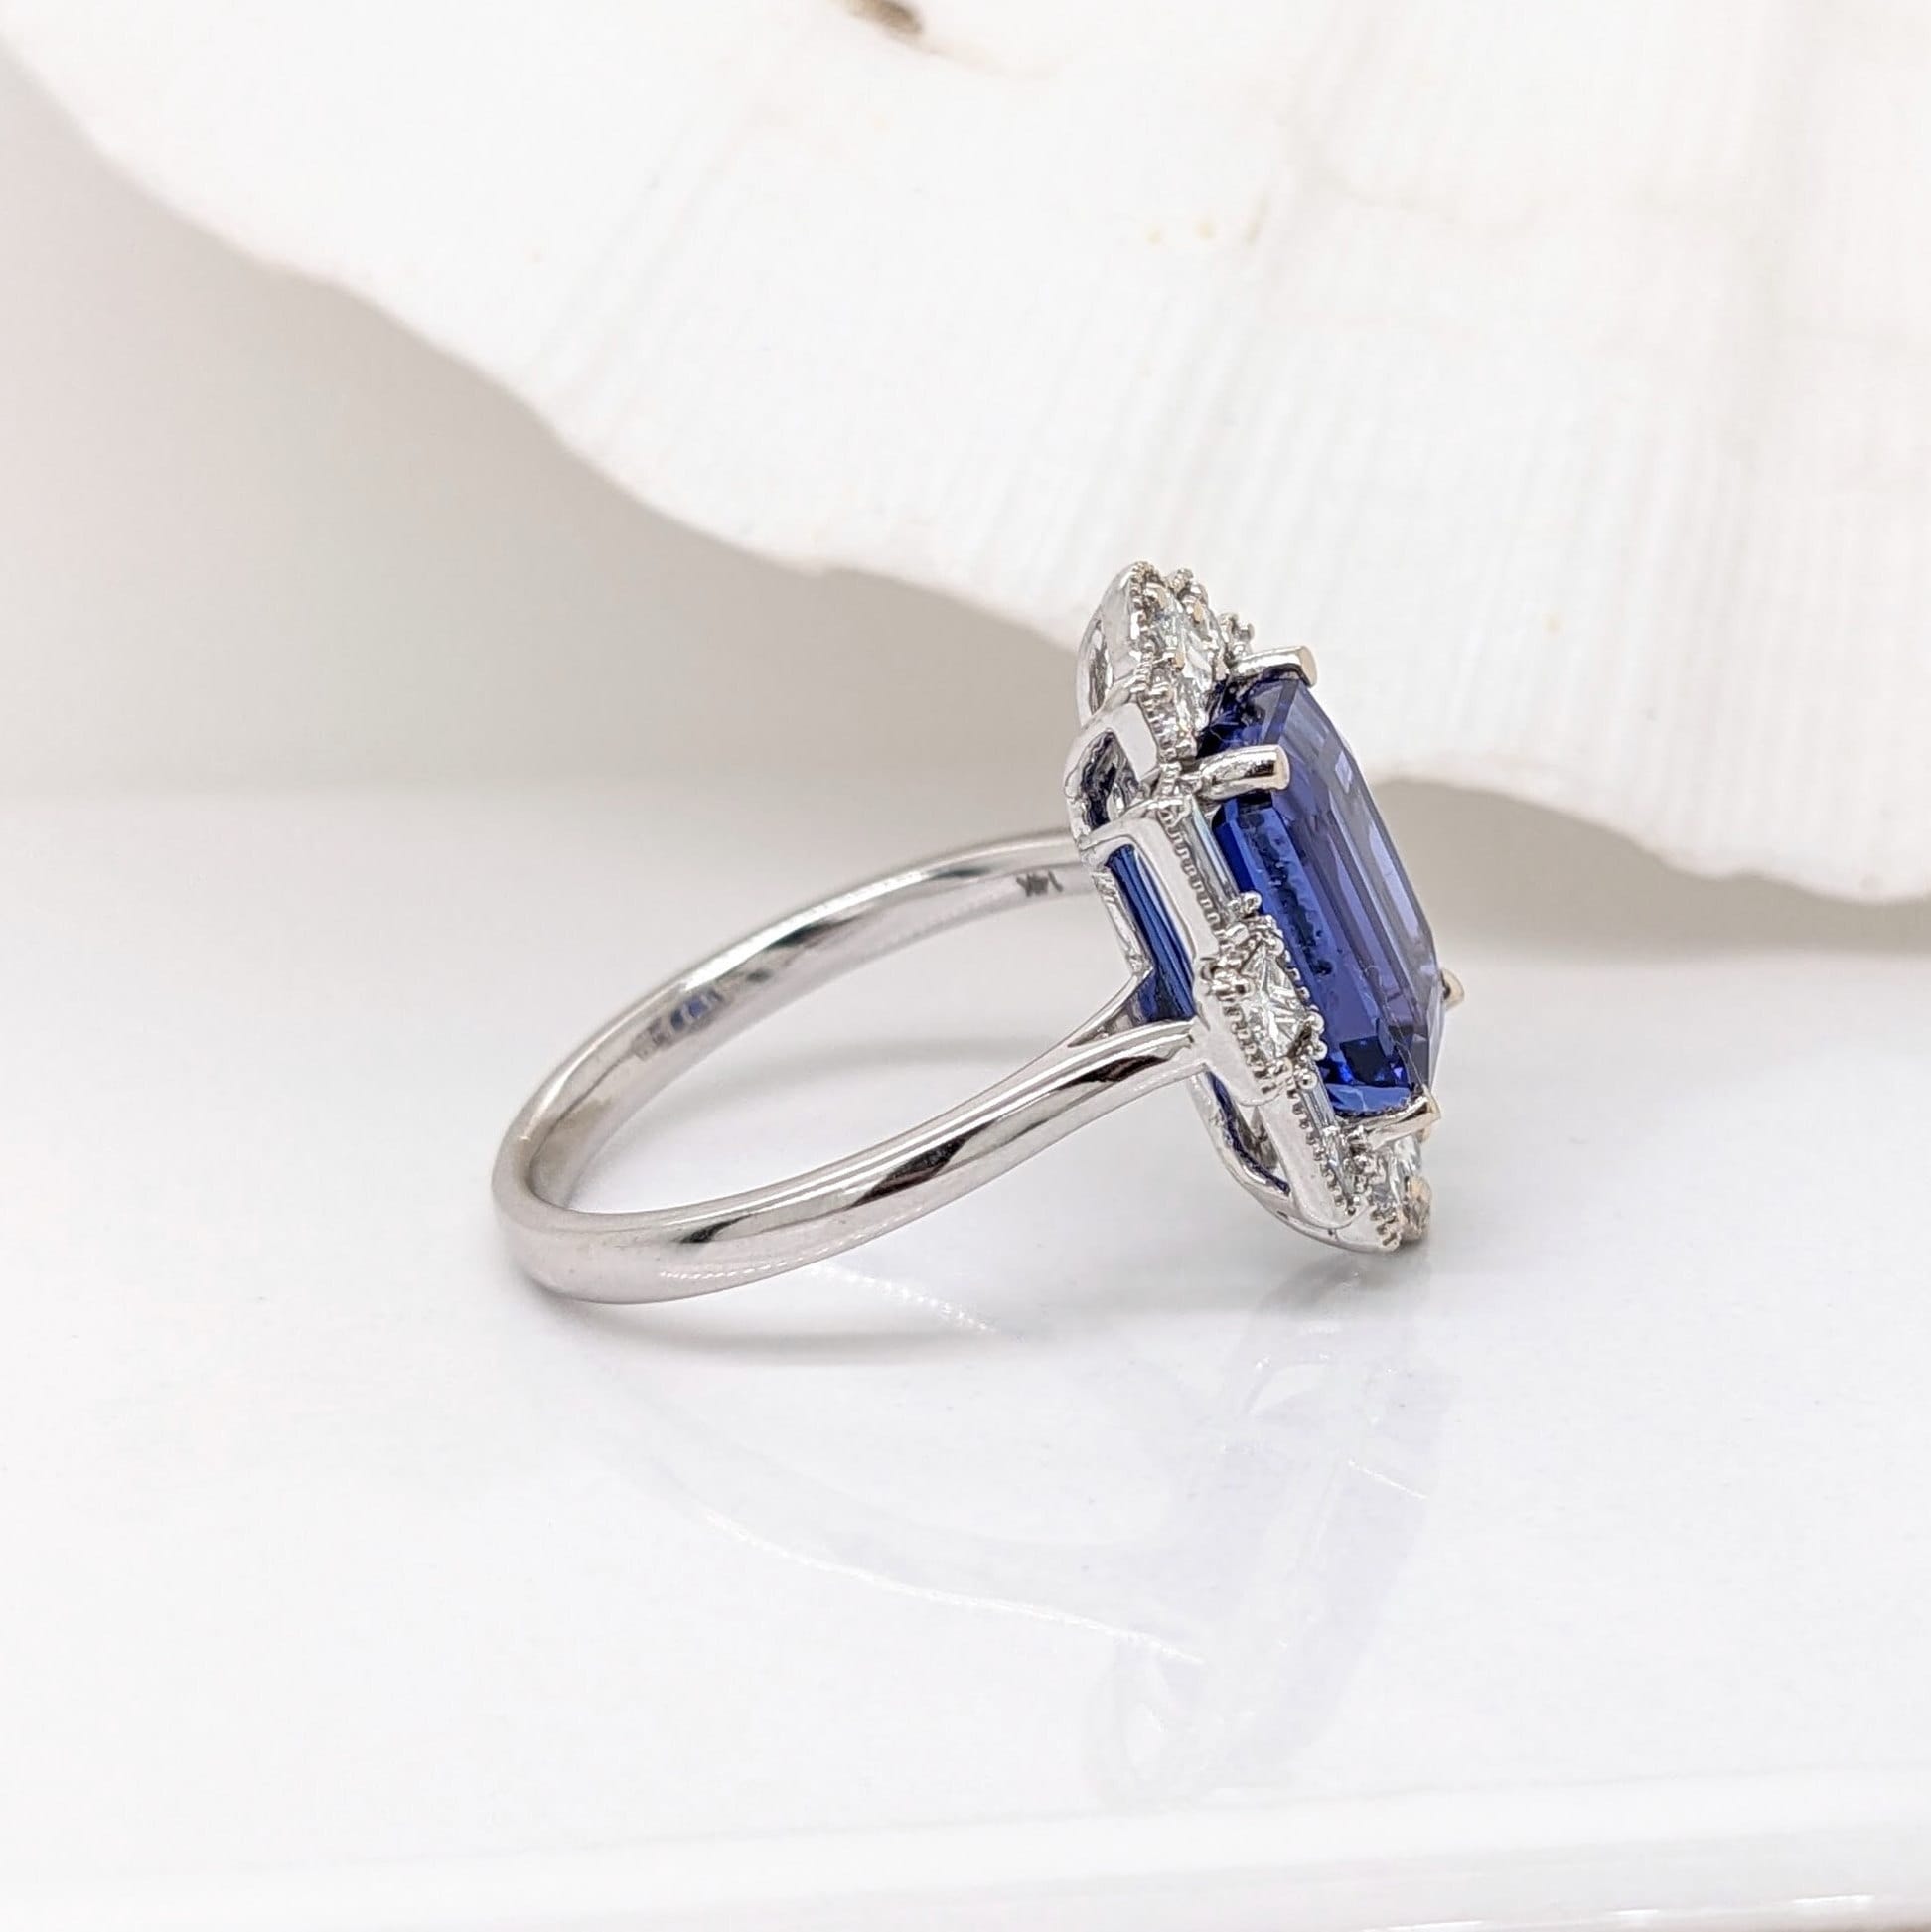 emerald cut tanzanite 9x7mm blue natural gemstone and diamond ring in 14k white gold with milgrain detail, art deco style with a straight shank and halo of 4 baguette diamond accents 4 princess diamond accents and 4 round diamond accents